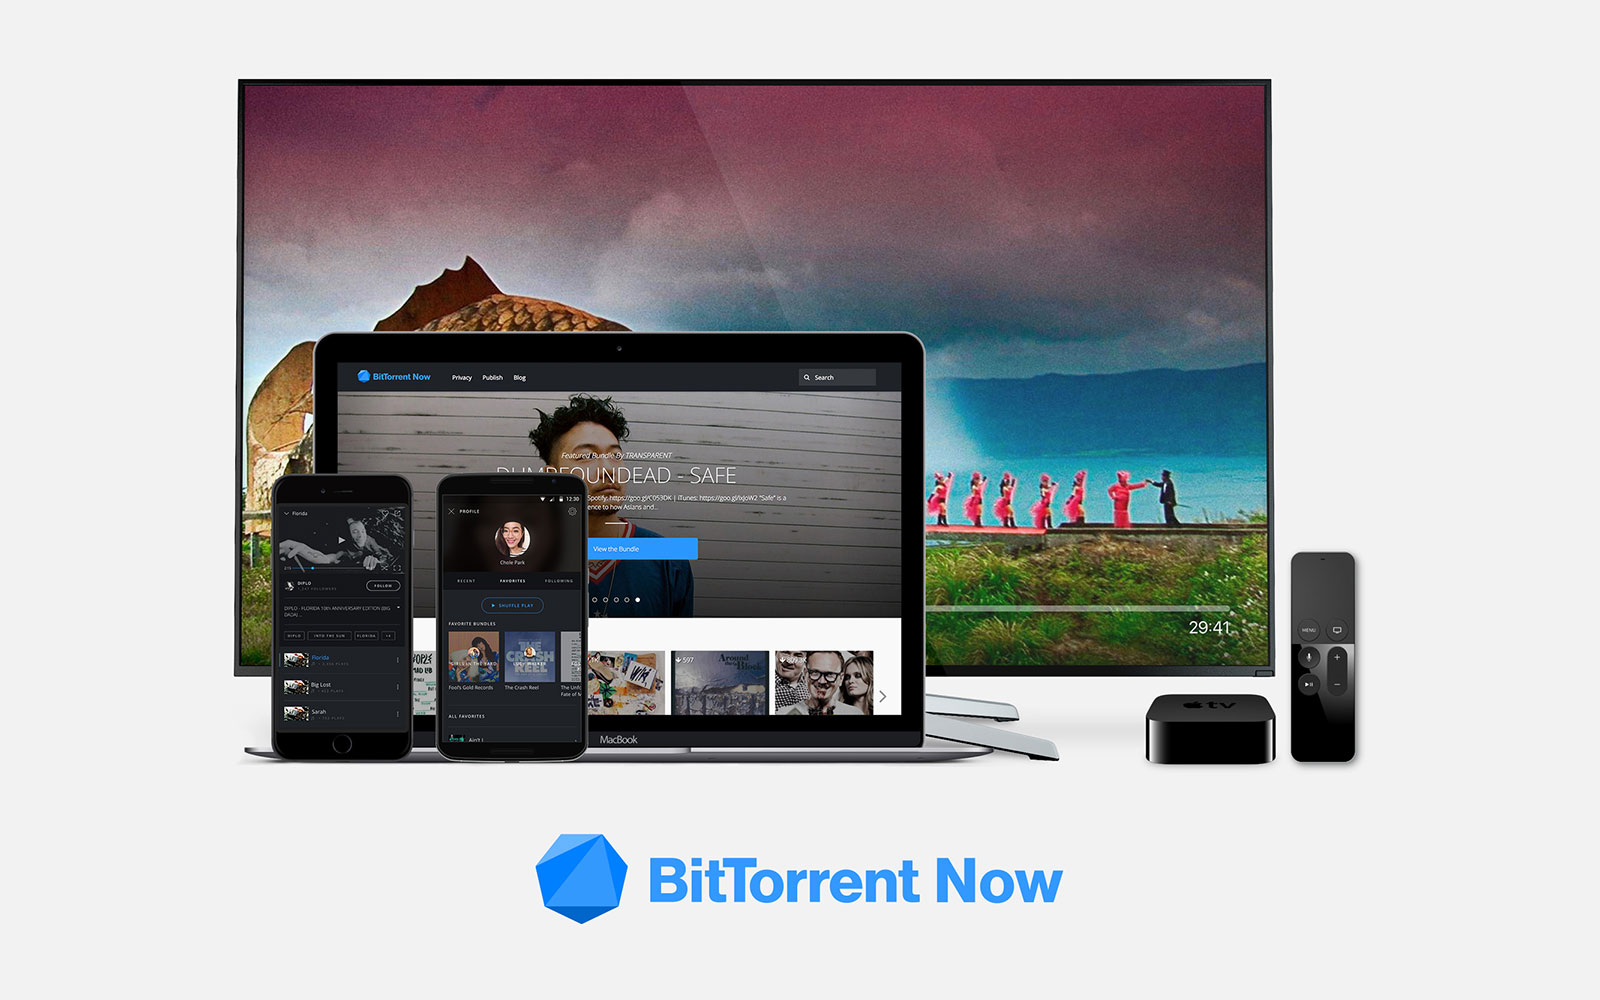 BitTorrent Now is an open, ad-supported music and video platform